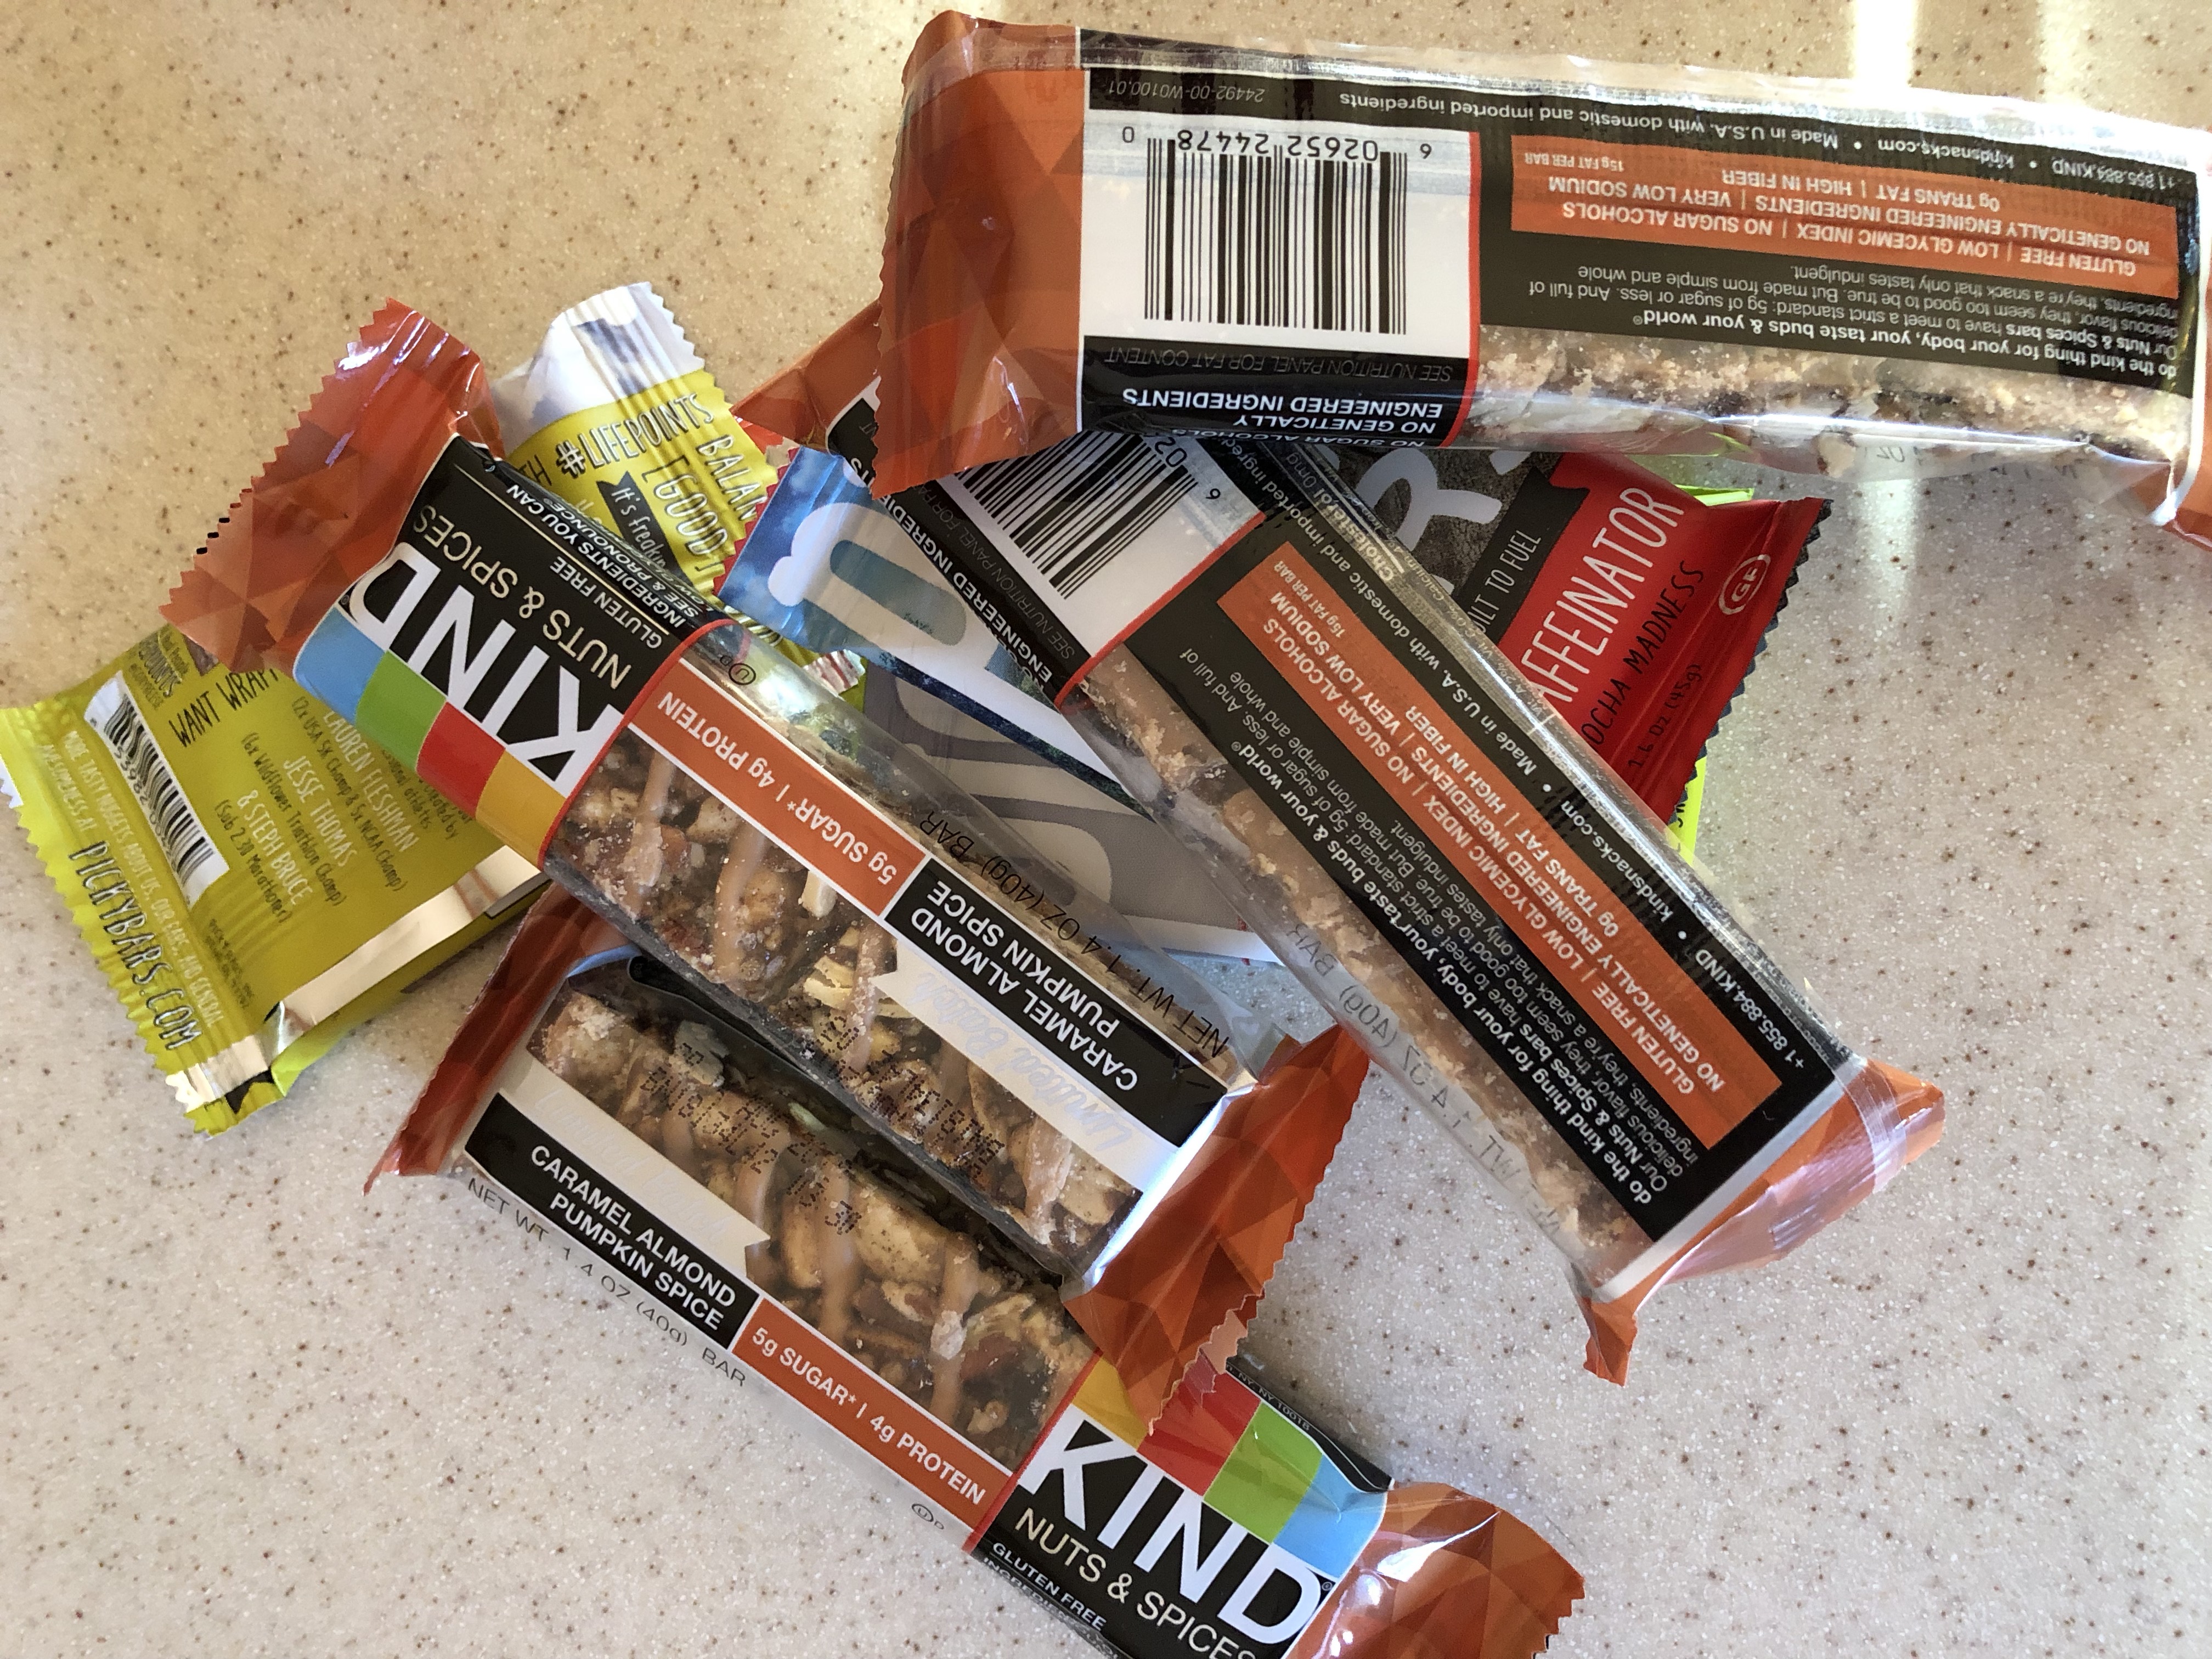 Bunch of energy bars tossed together in a pile to fuel hiking many miles.